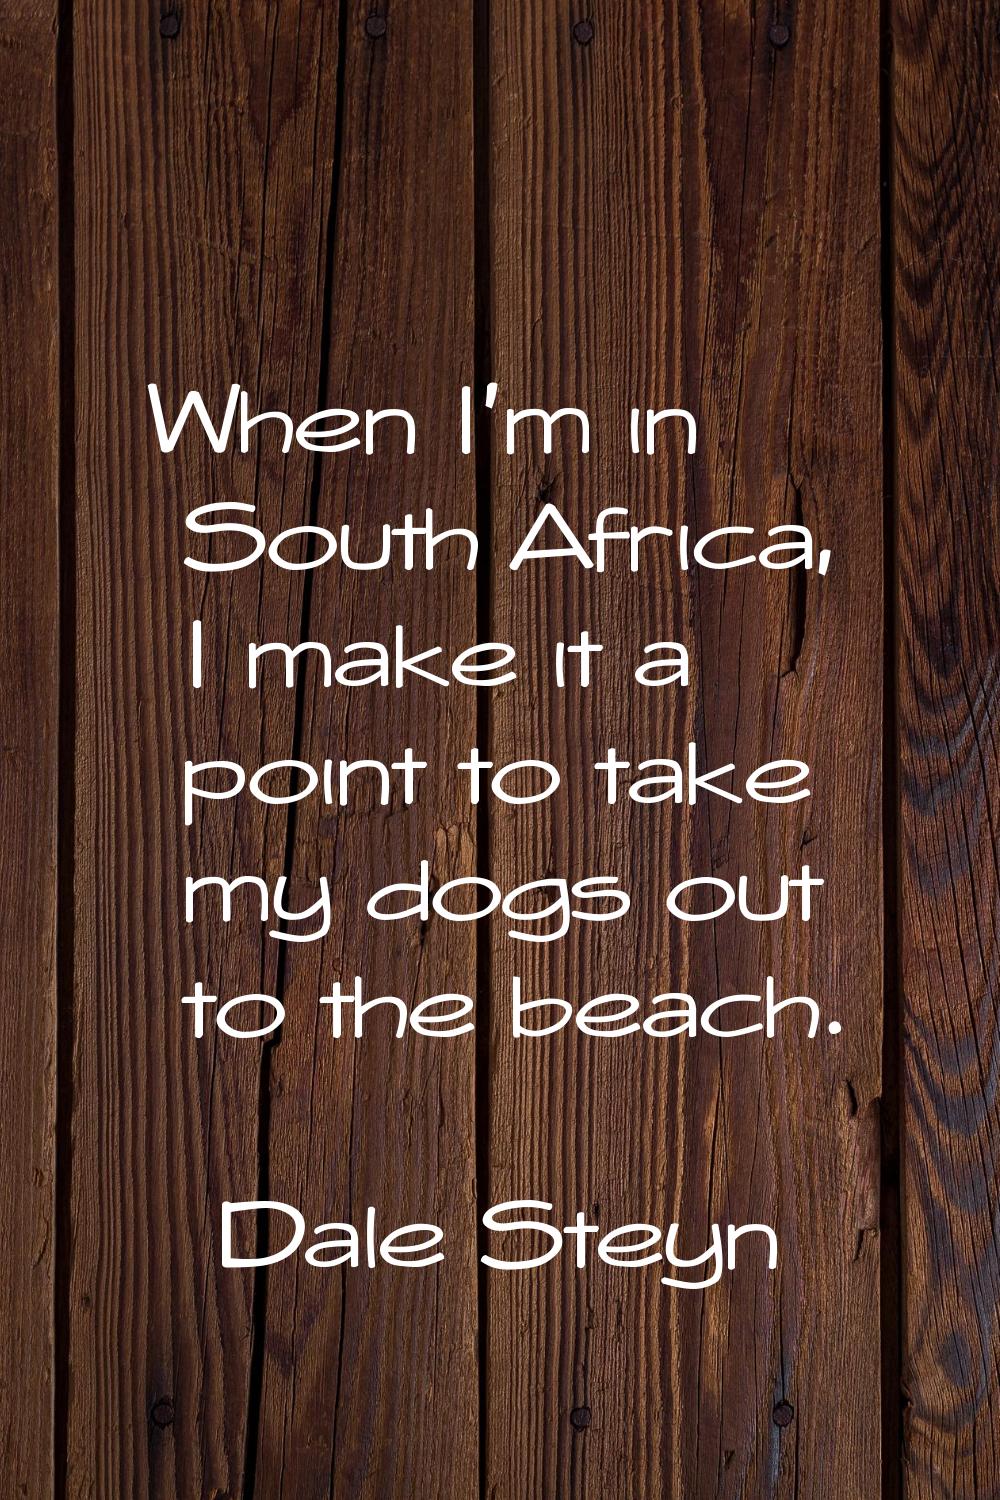 When I'm in South Africa, I make it a point to take my dogs out to the beach.